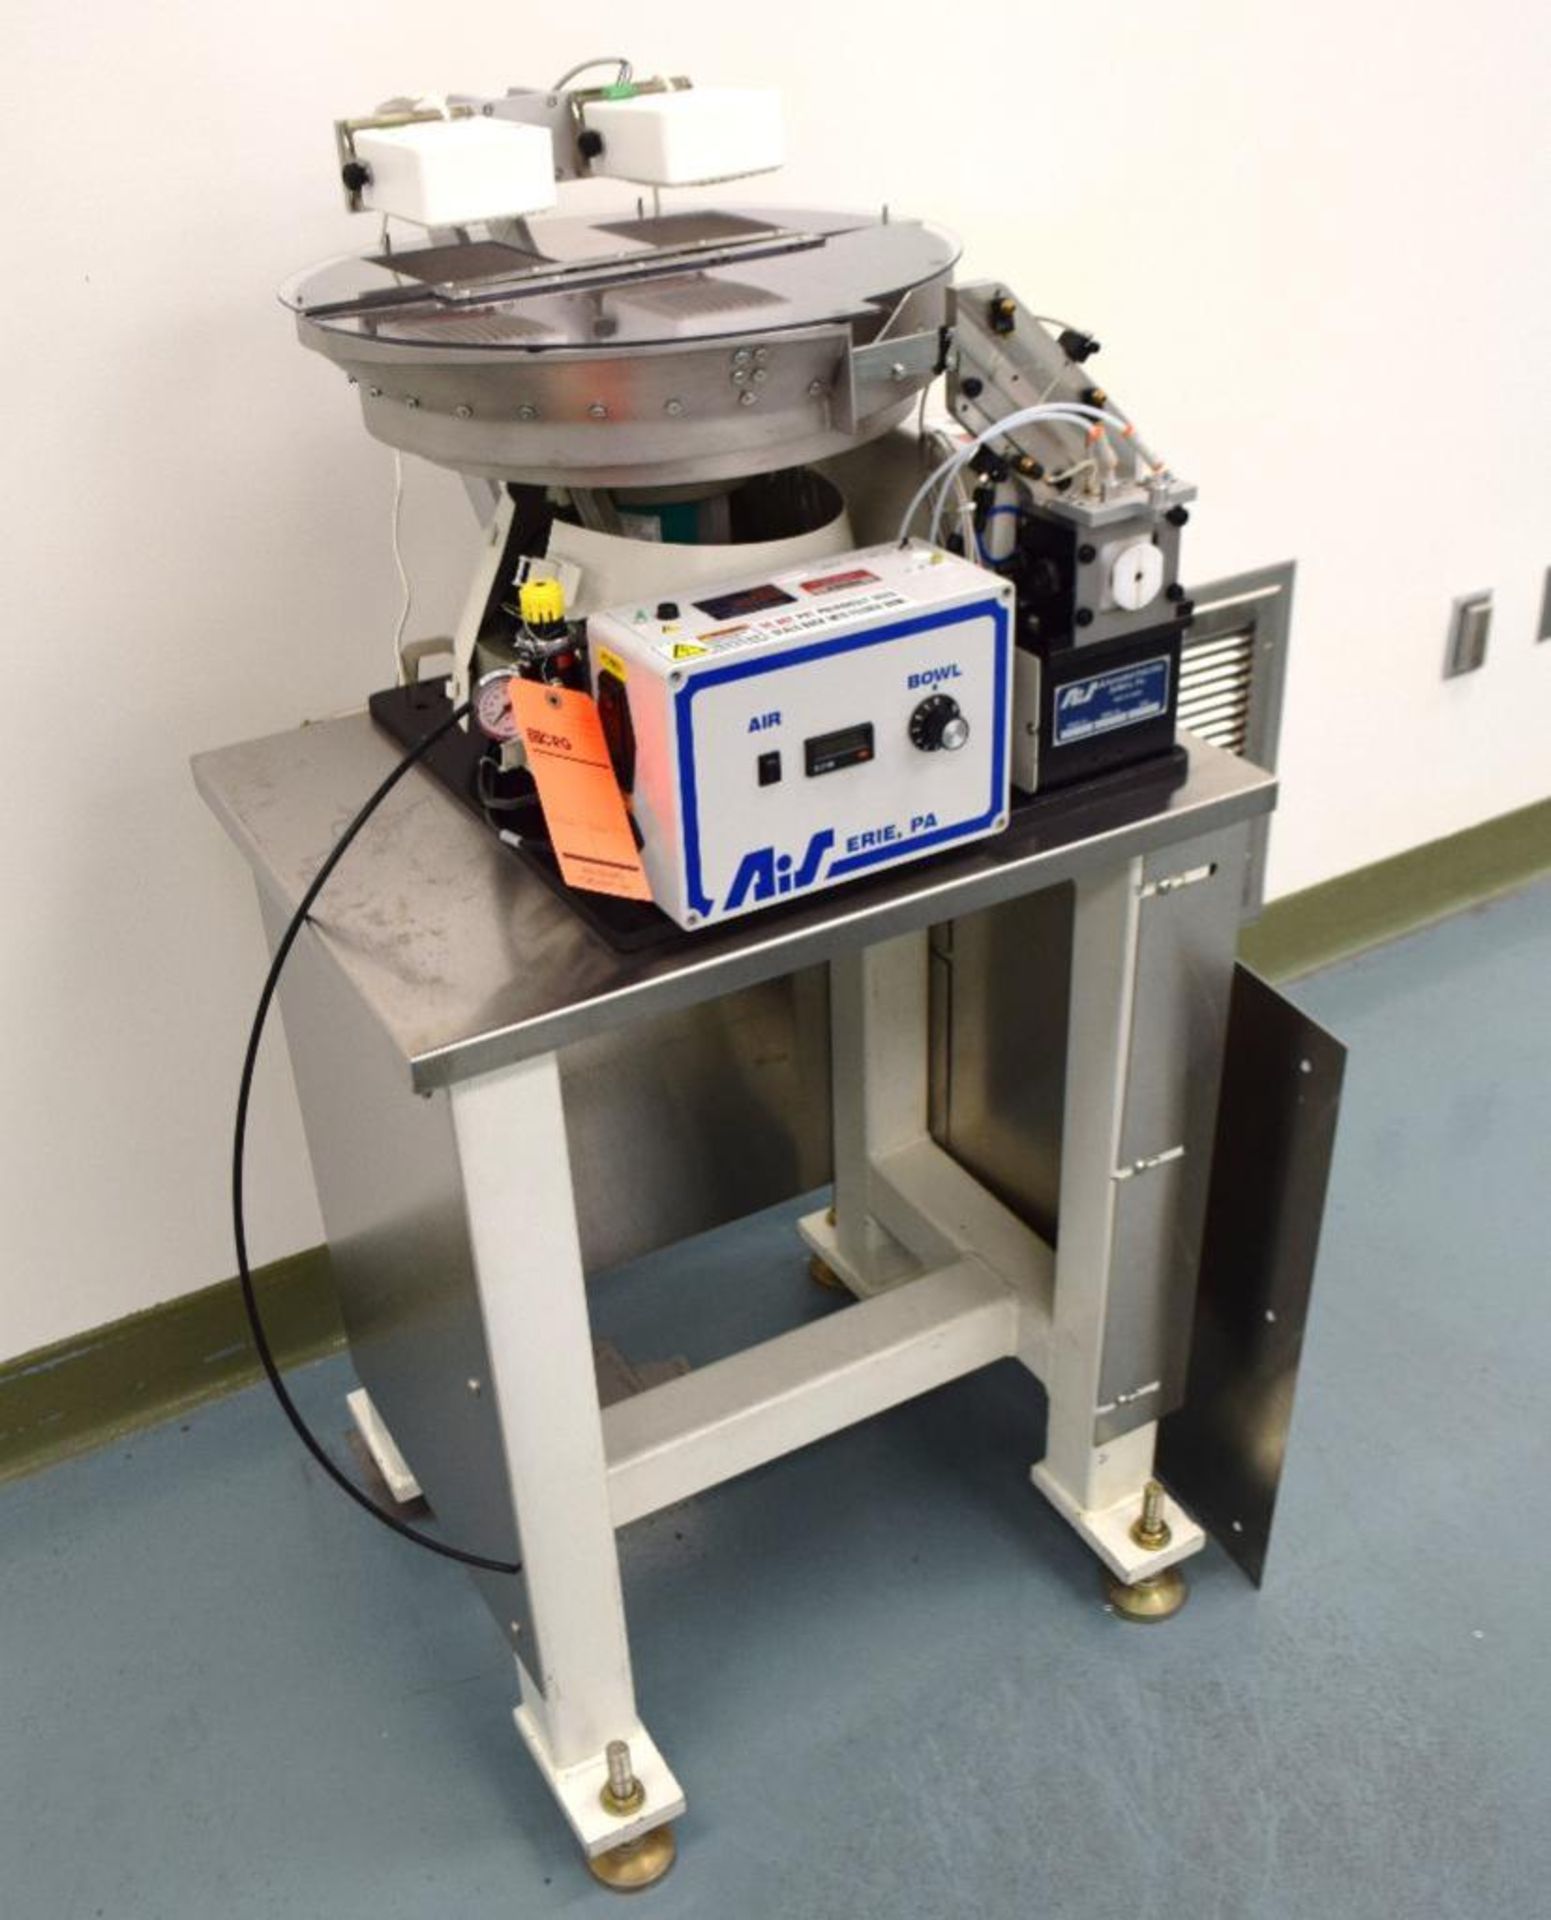 AIS Automated Industrial Systems Approximate 16" Diameter Stainless Steel Vibratory Bowl Feeder, Mod - Image 5 of 6